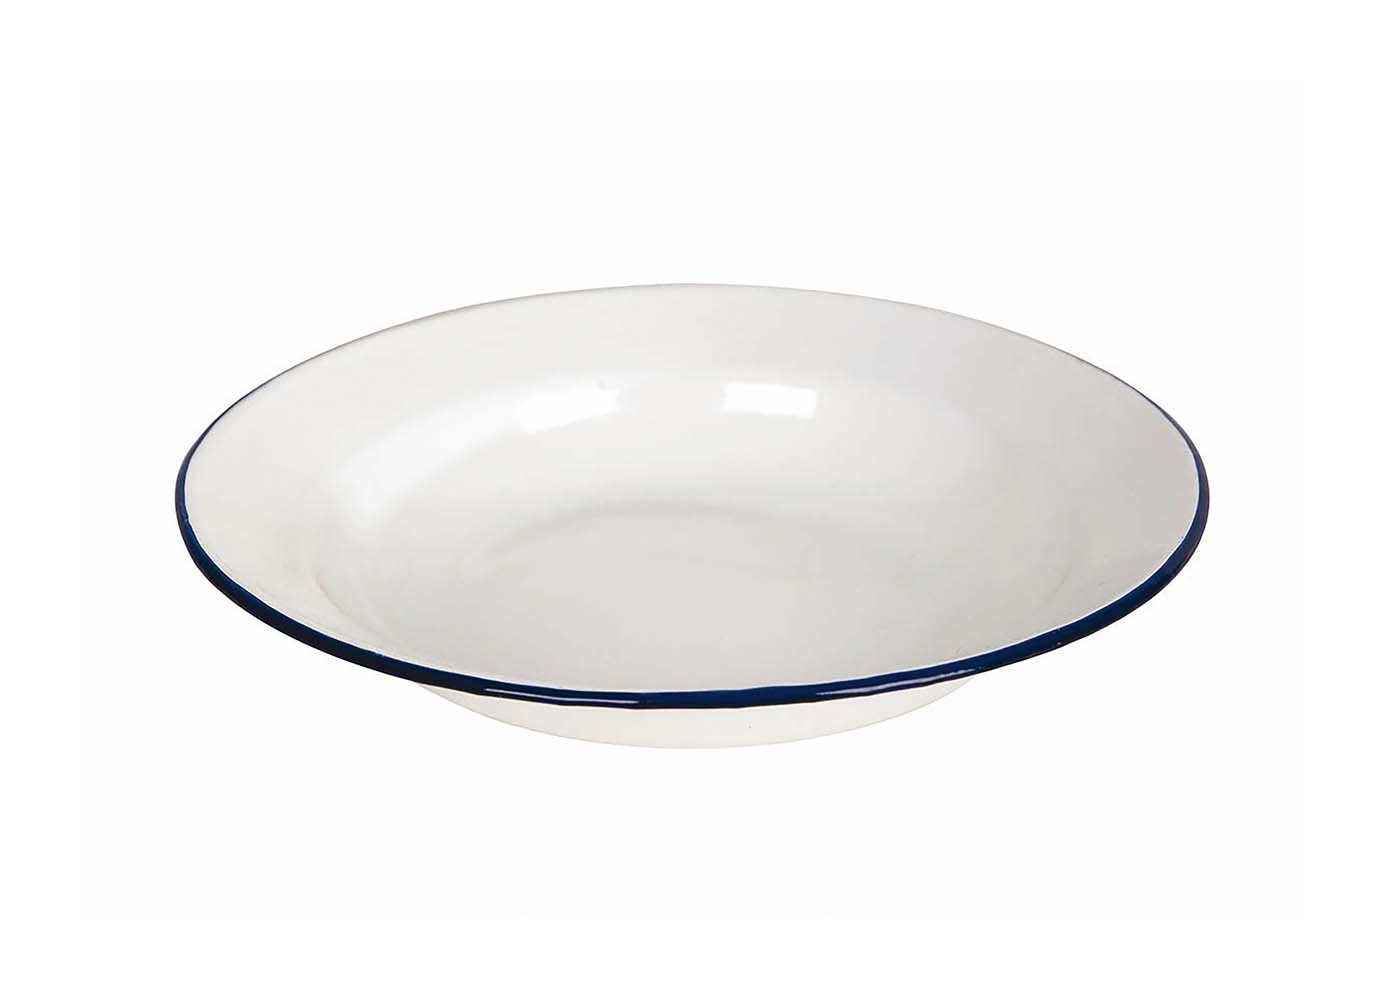 6101525 A deep enamelled plate. This strong steel plate has an enamel layer, this hard layer ensures extra hygiene and the sturdiness of the plate. Enamel is also inflammable and durable. The plate is decorated with a blue edge.